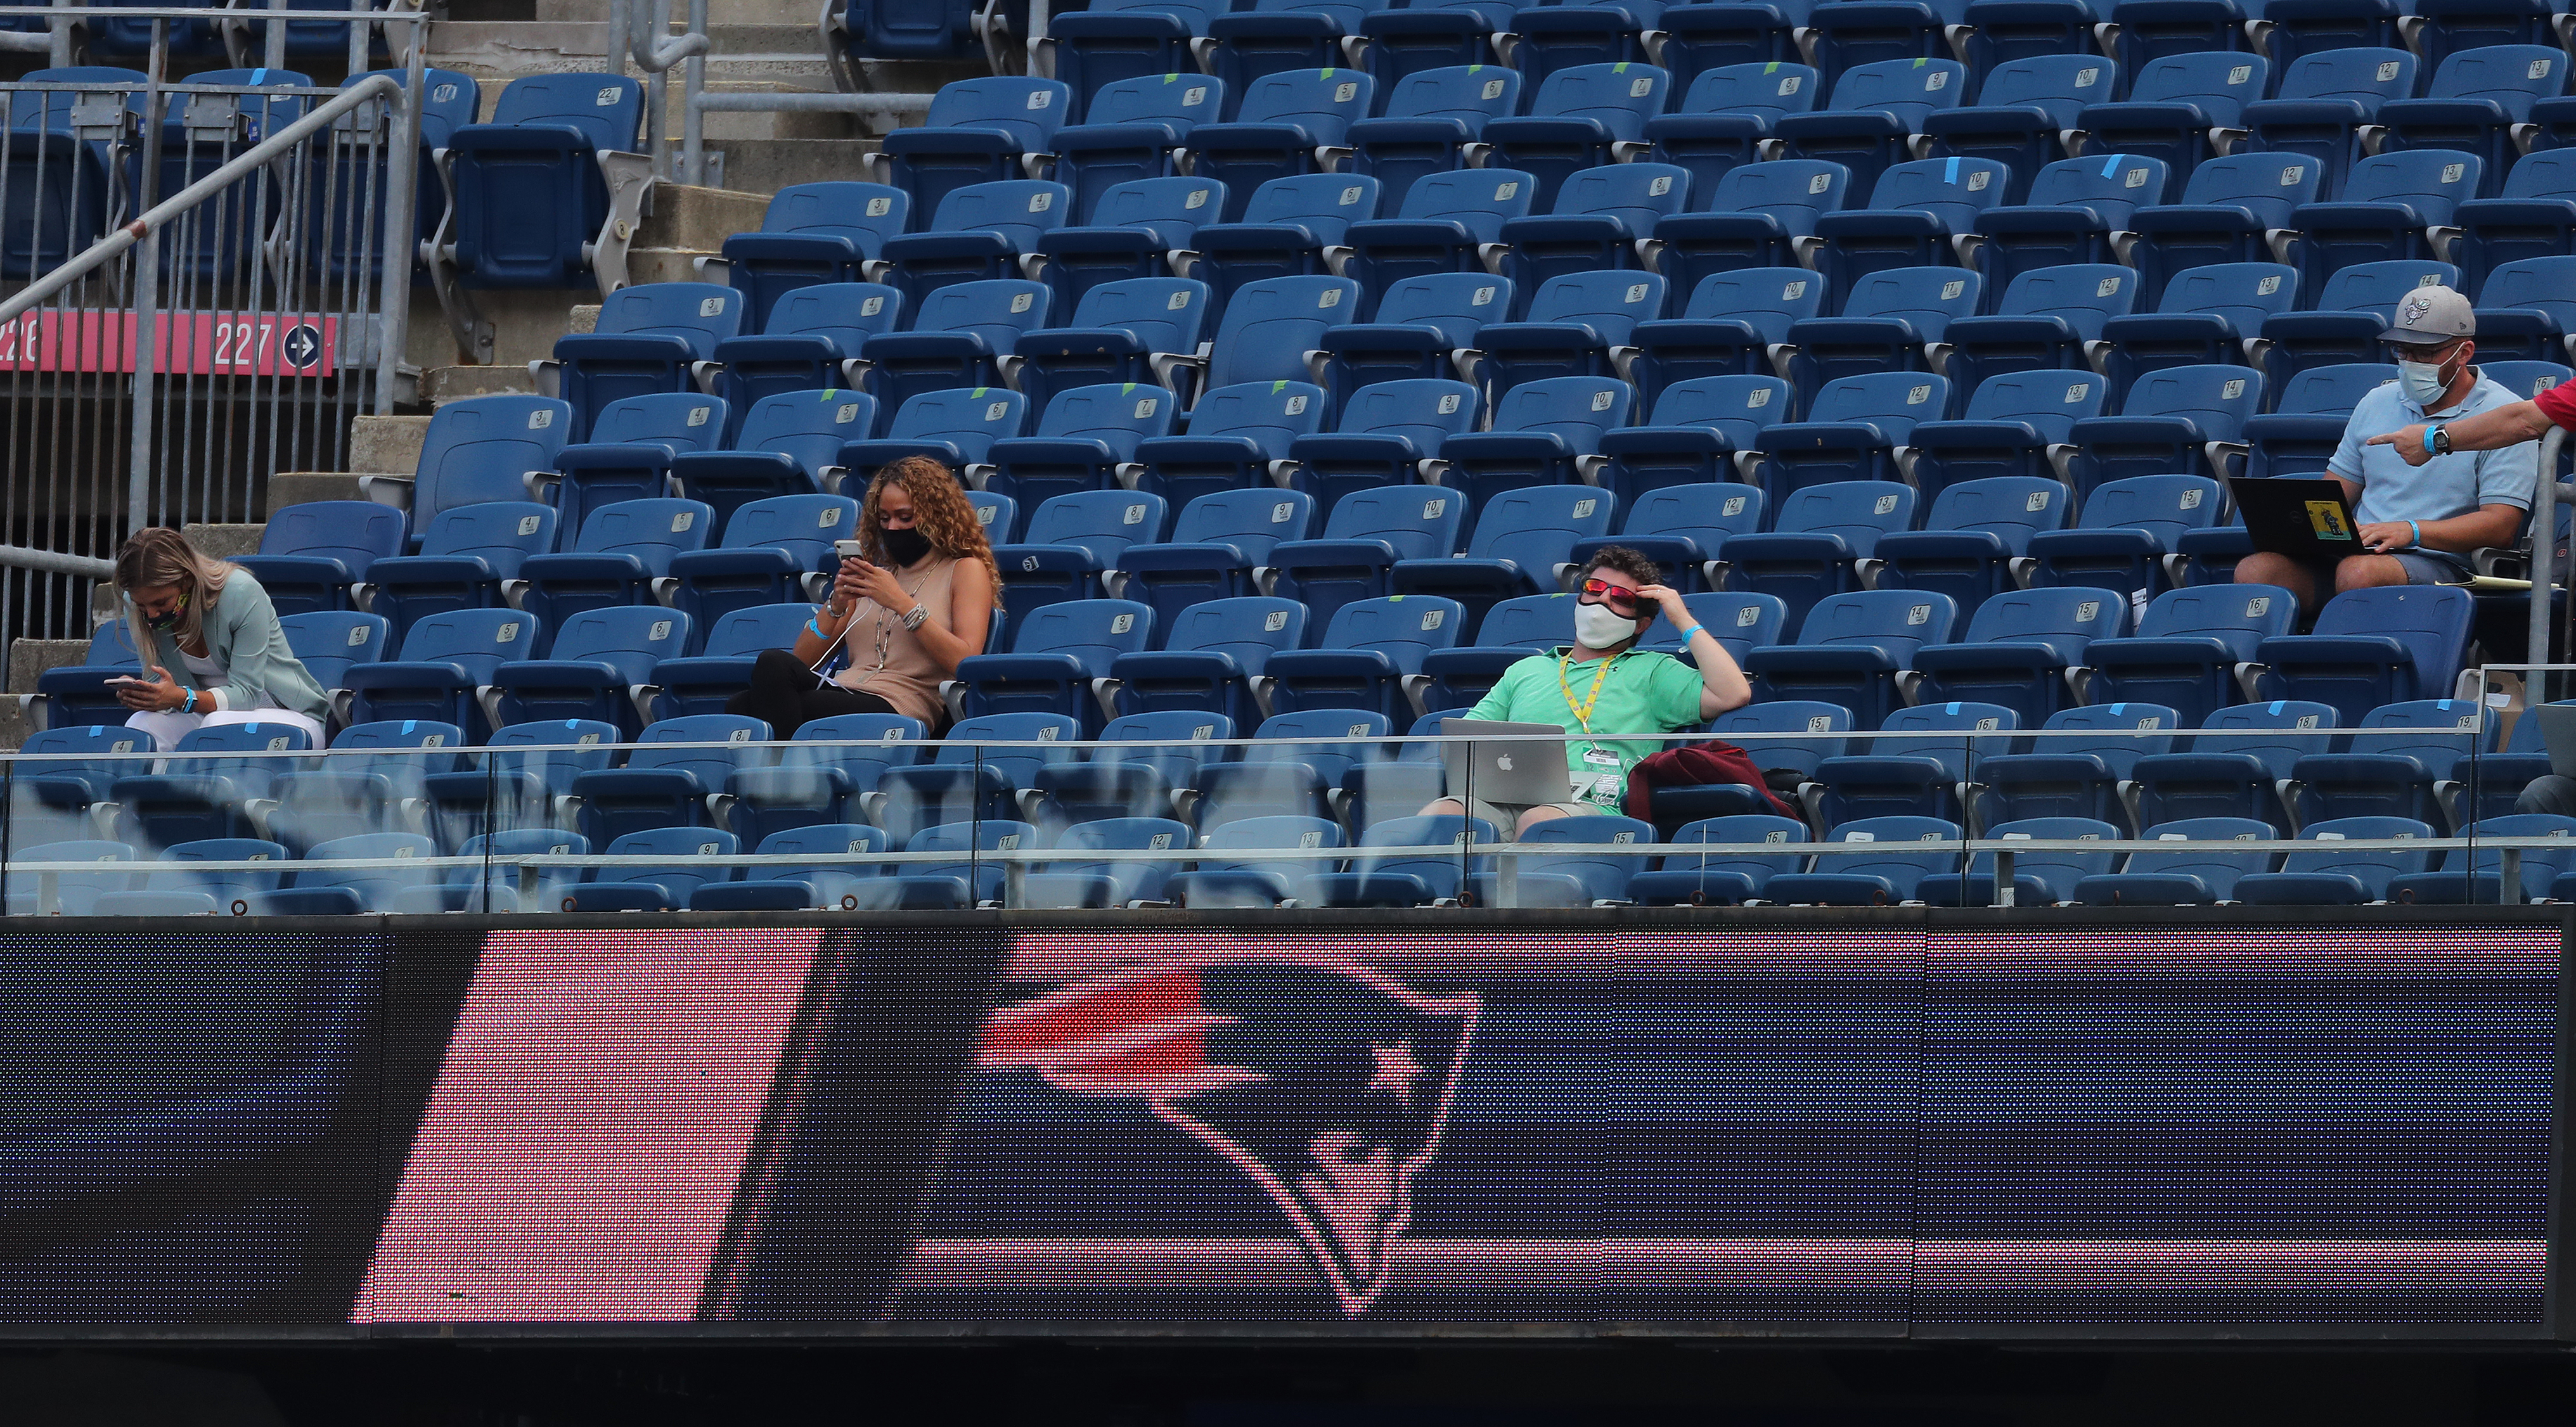 What's it like watching a Patriots game in an empty Gillette Stadium?  Beyond bizarre - The Boston Globe